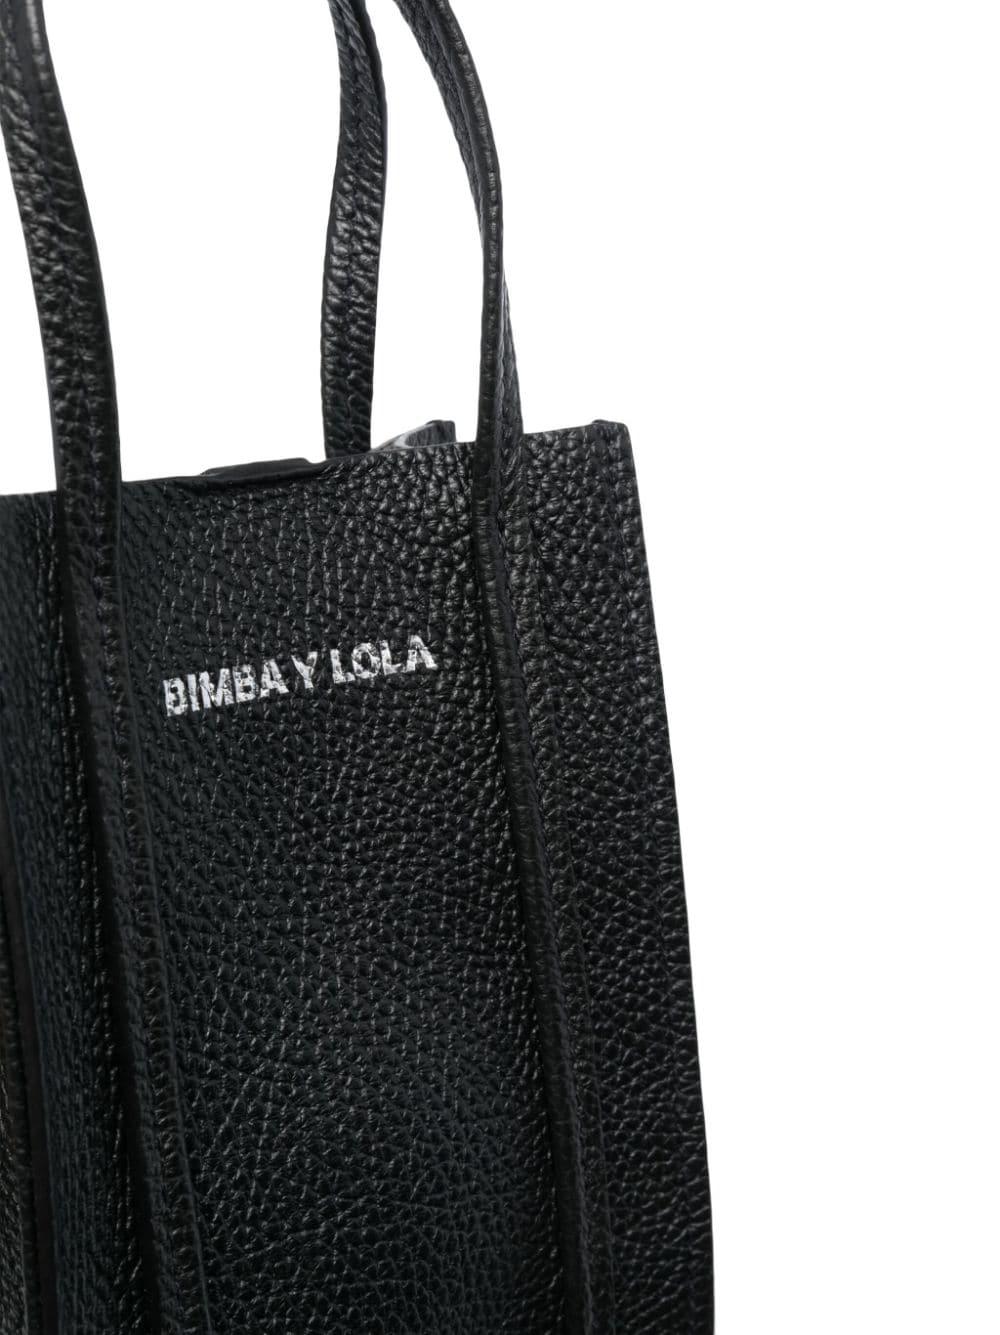 Bimba y Lola Crossbody Bag with lettering pink strap